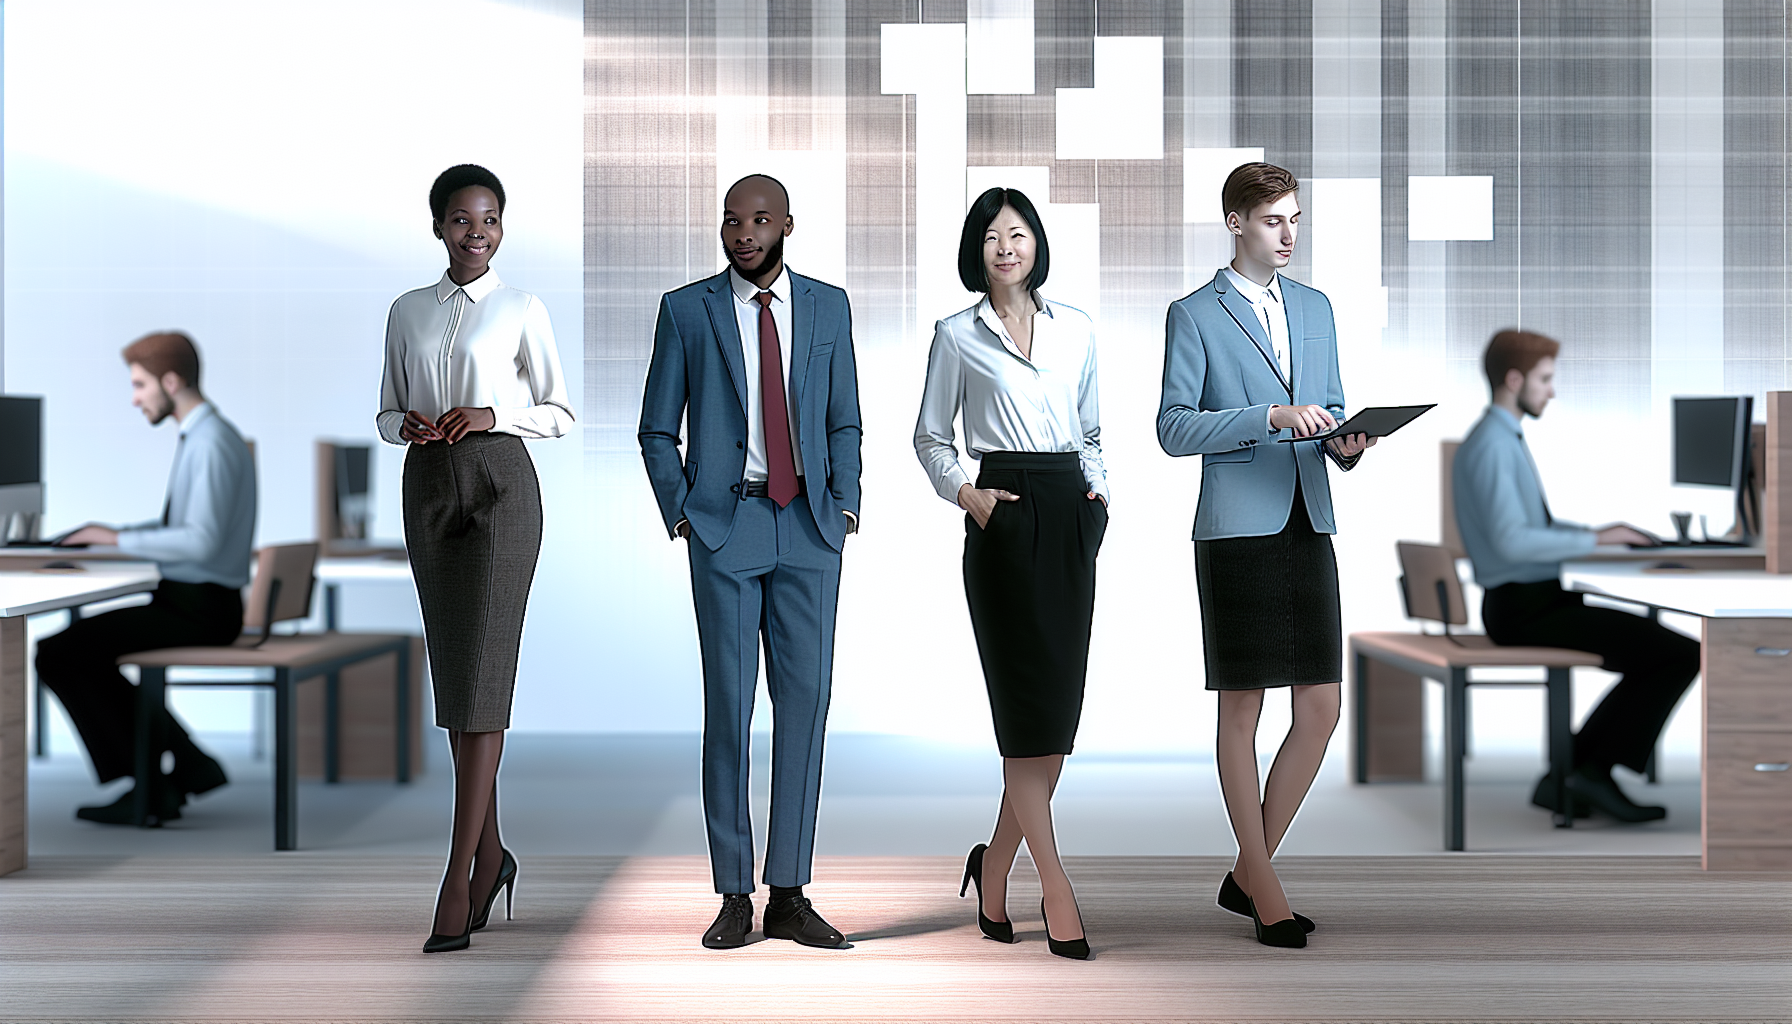 An image of employees in professional attire, illustrating the importance of workplace conduct and expectations outlined in the employee handbook.